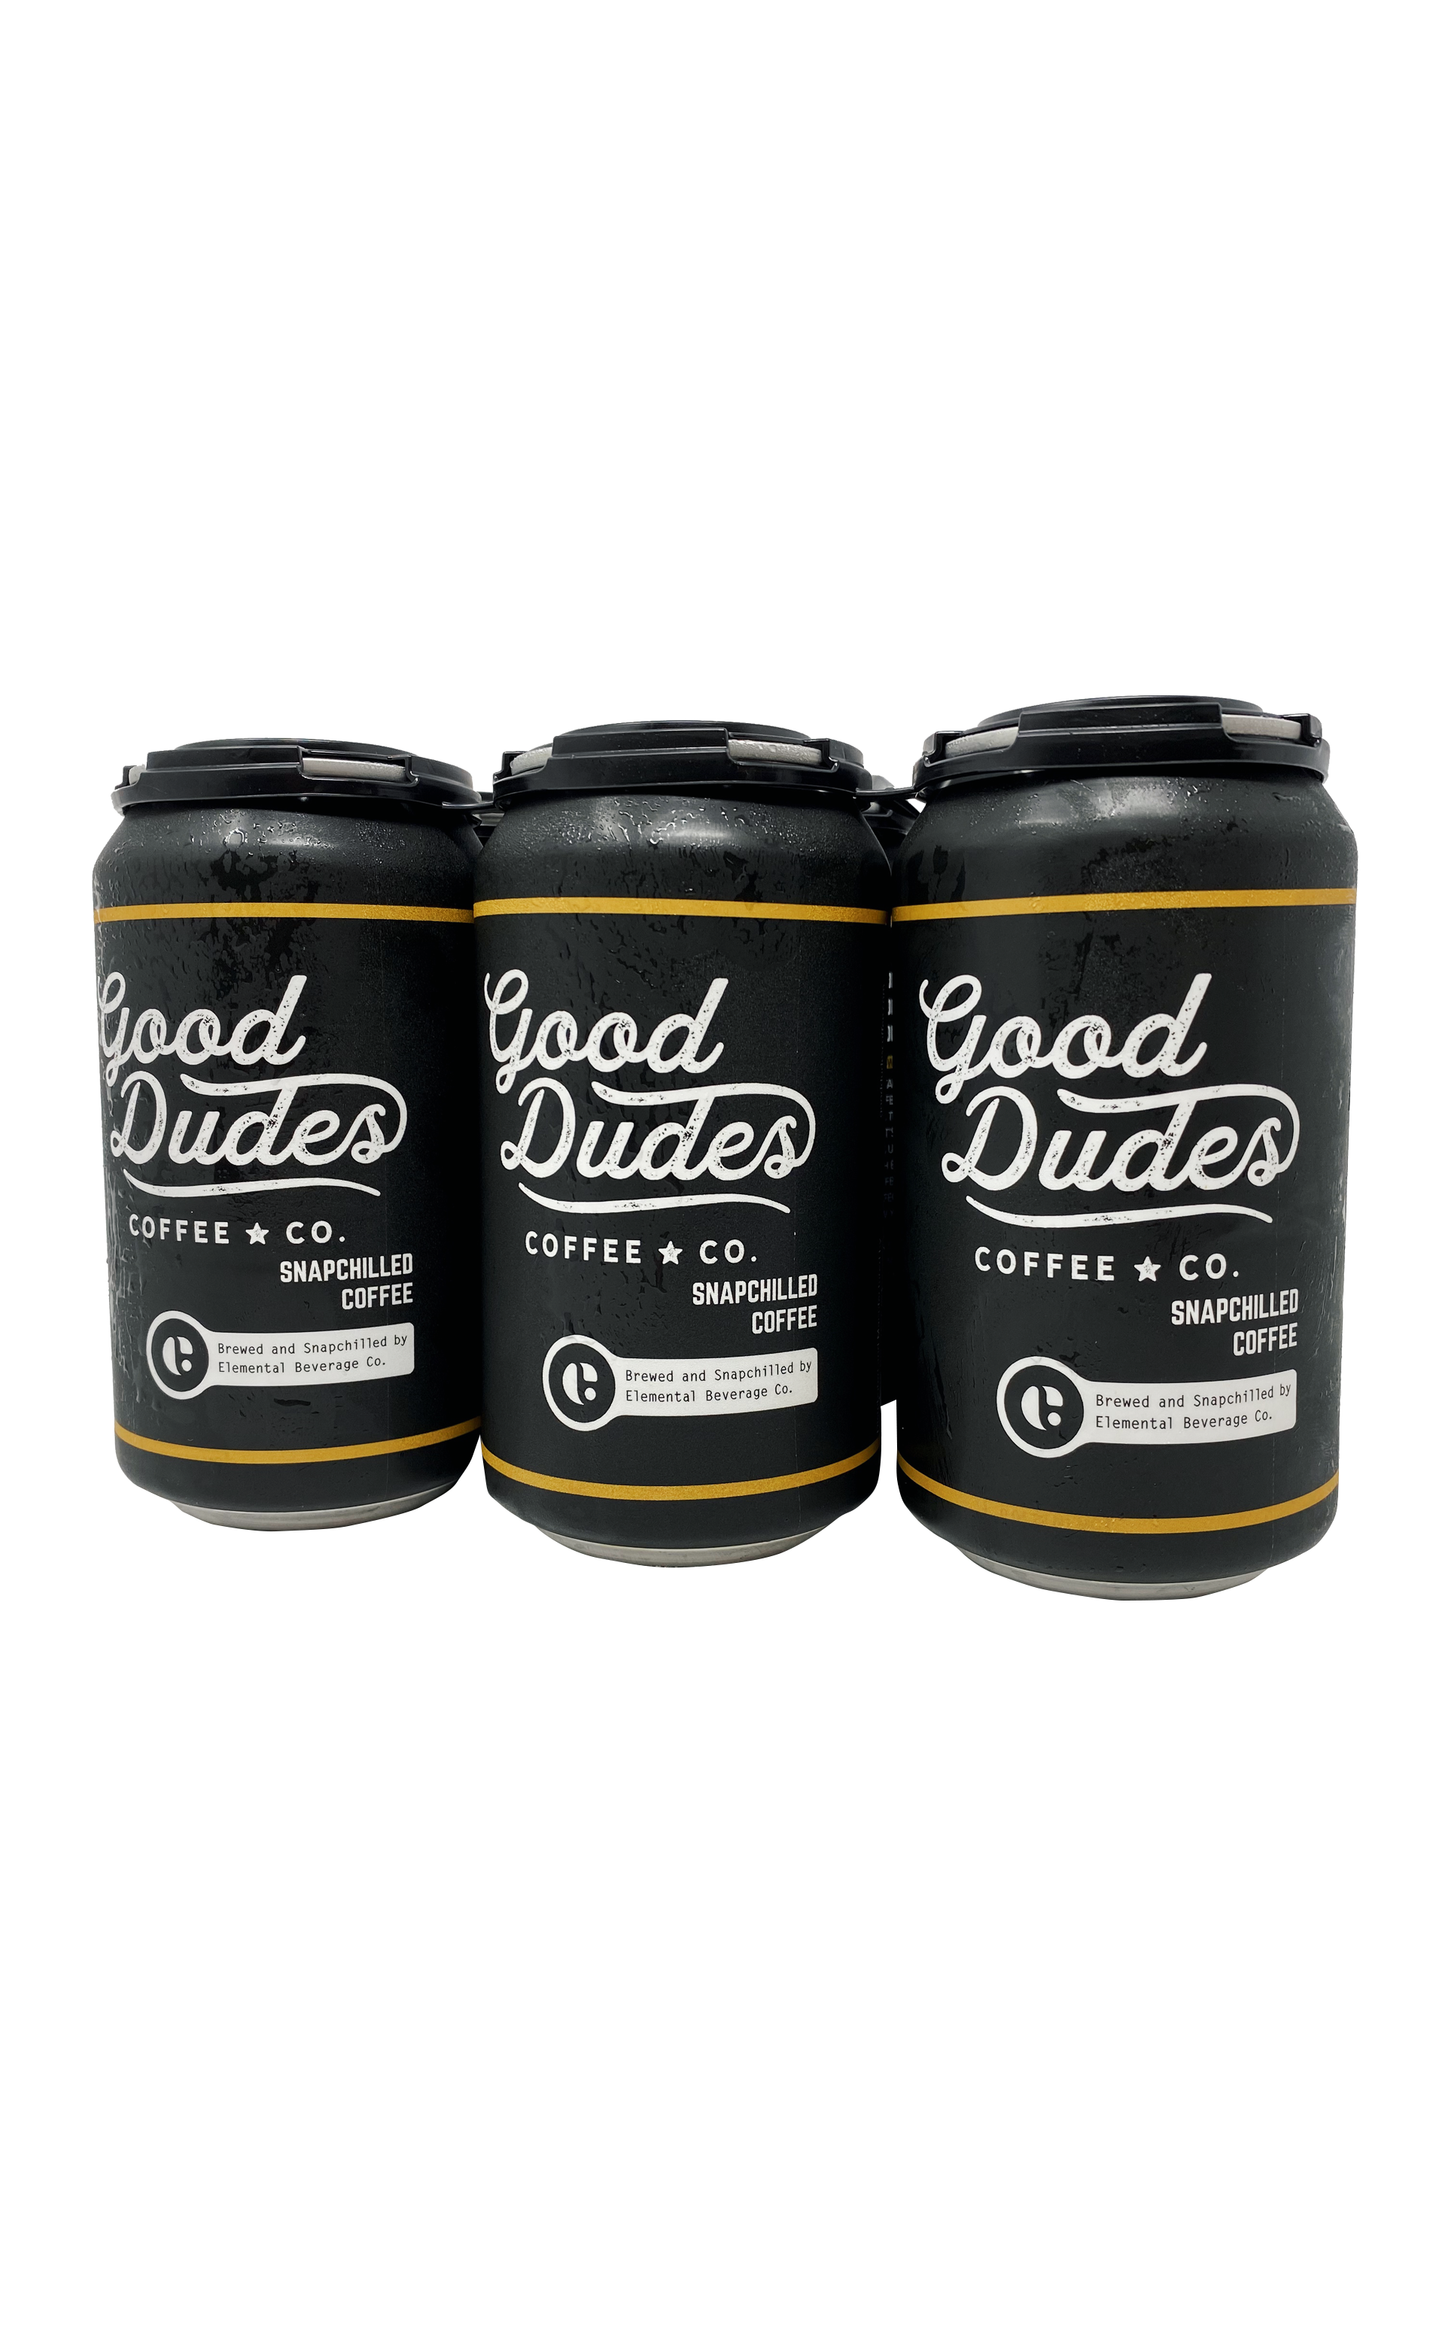 The Snap Chilled Washington Good Dudes (12-Pack) *USA Only*